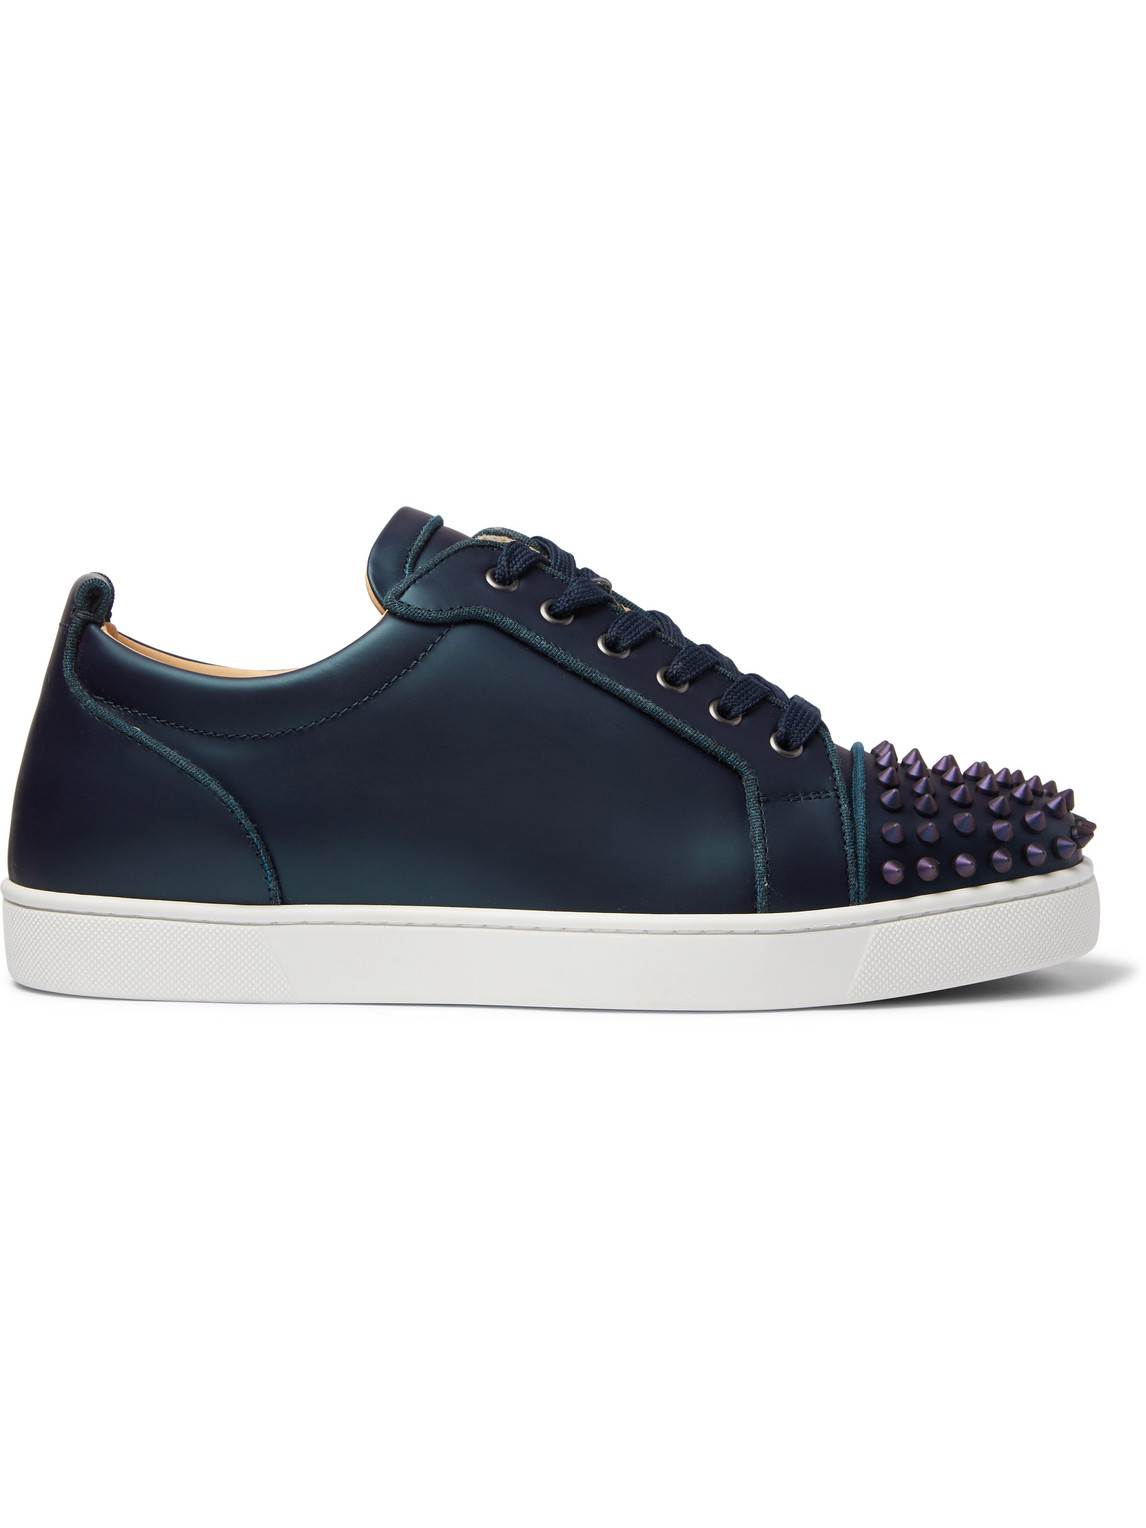 Christian Louboutin Louis Junior Spikes Cap-toe Iridescent Leather Sneakers  In Blue | ModeSens